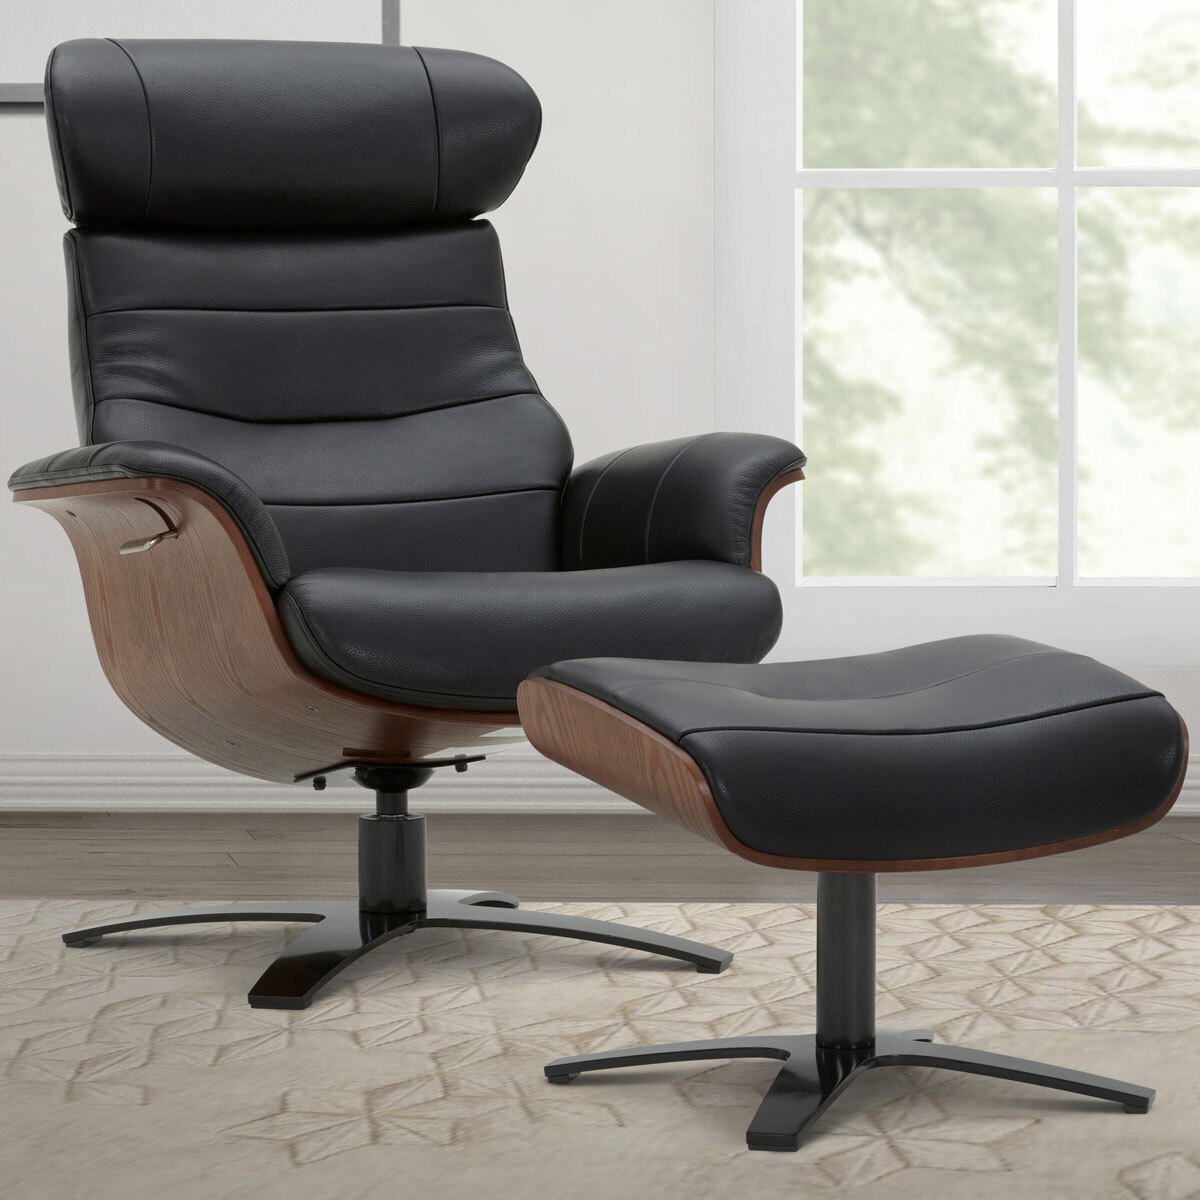 Karma Black Leather Swivel Chair, Black Leather Recliner With Ottoman